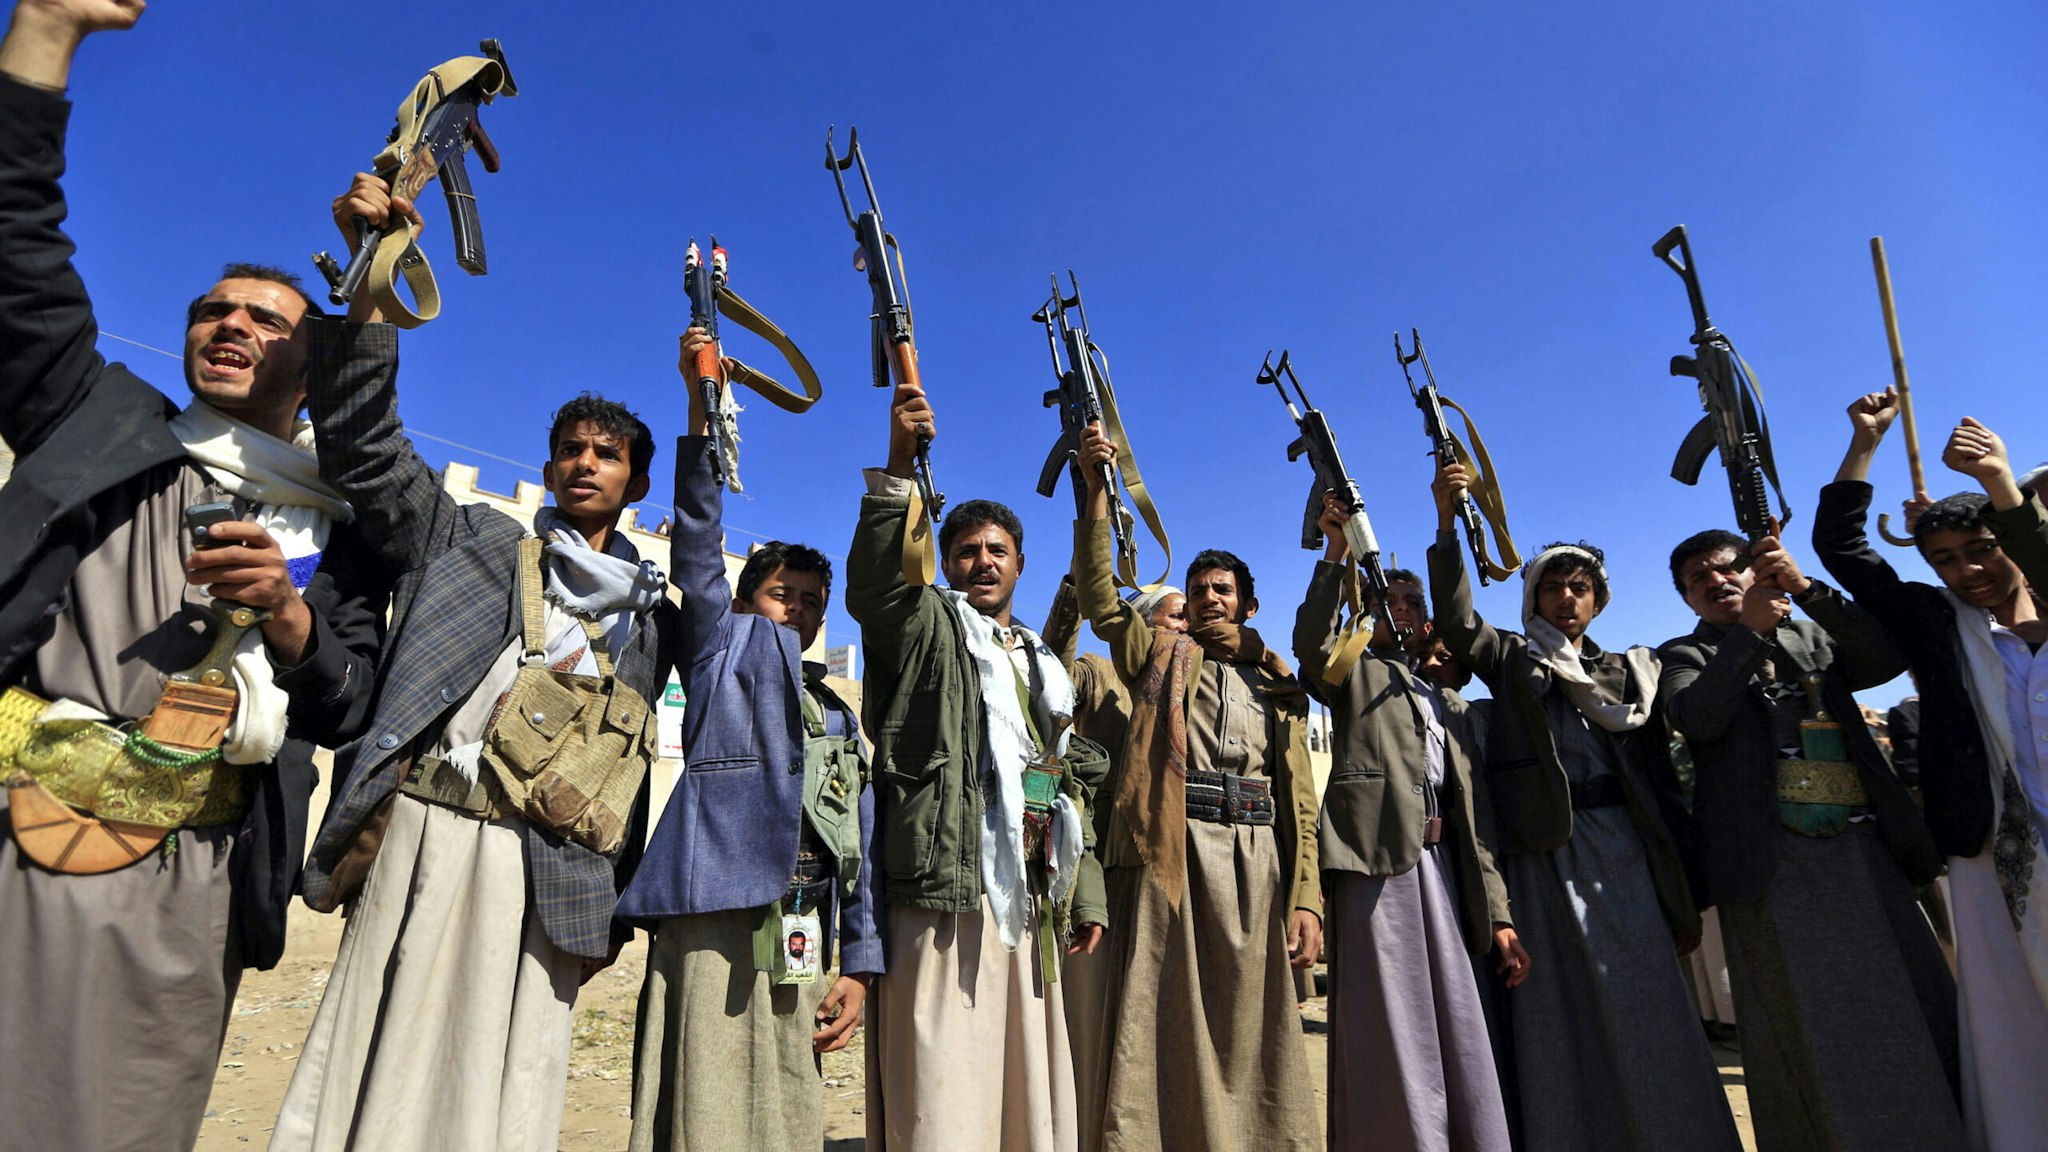 Armed Yemeni men brandish their weapons as they gather in the capital Sanaa to show their support to the Shiite Huthi movement against the Saudi-led intervention, on December 13, 2018. UN chief Antonio Guterres announced today a series of breakthroughs in talks with rivals in the Yemen conflict, including a ceasefire for a vital port.